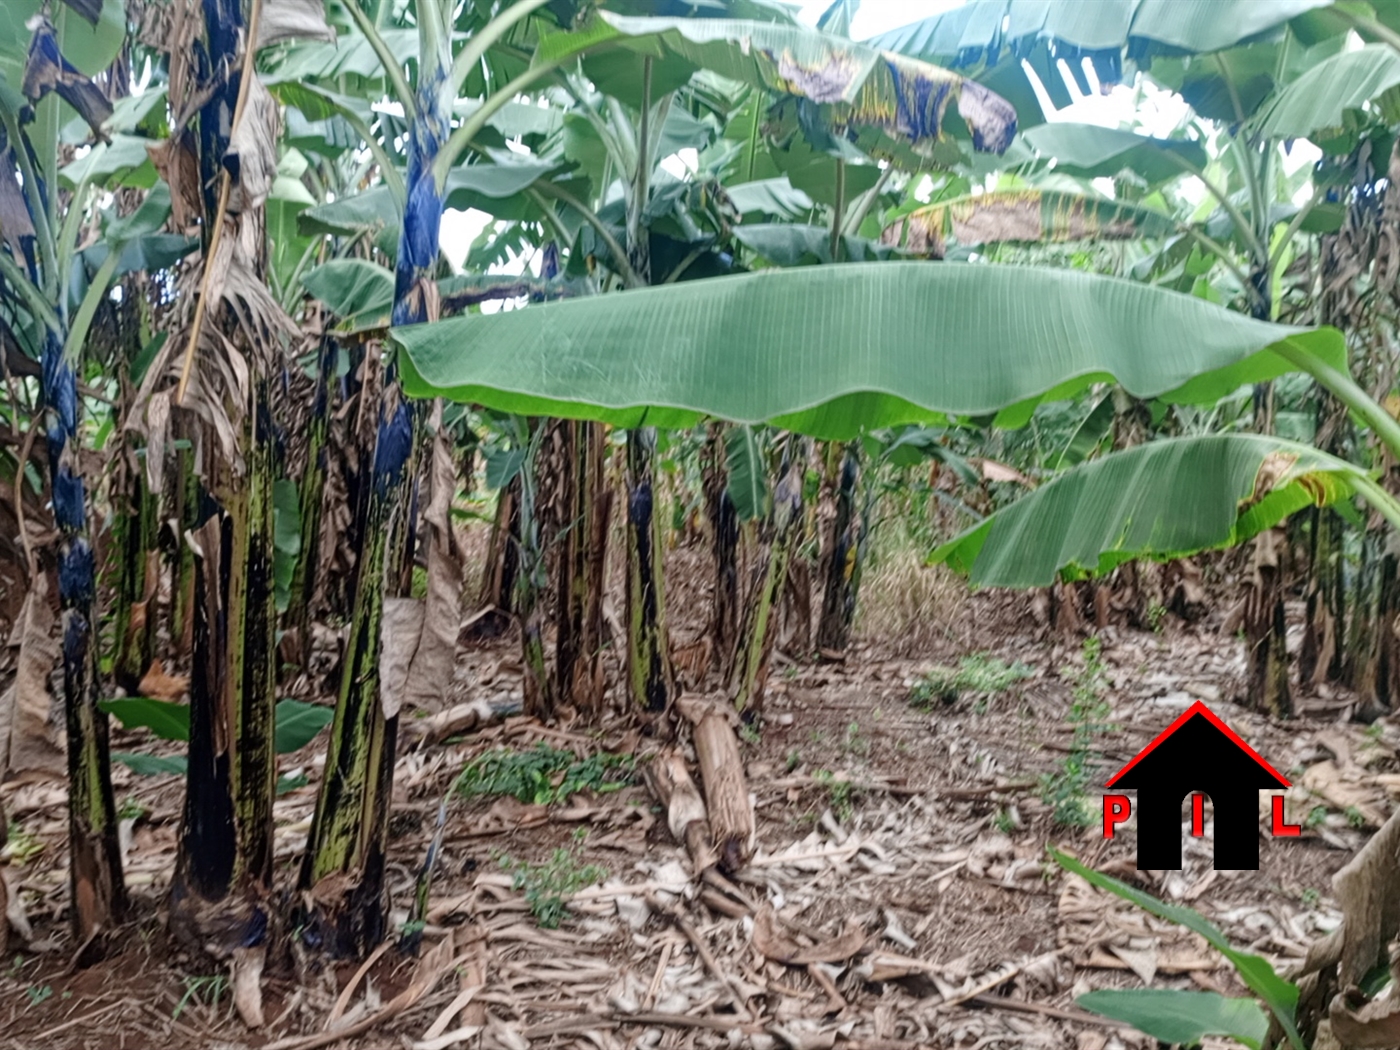 Commercial Land for sale in Kikyuusa Luweero